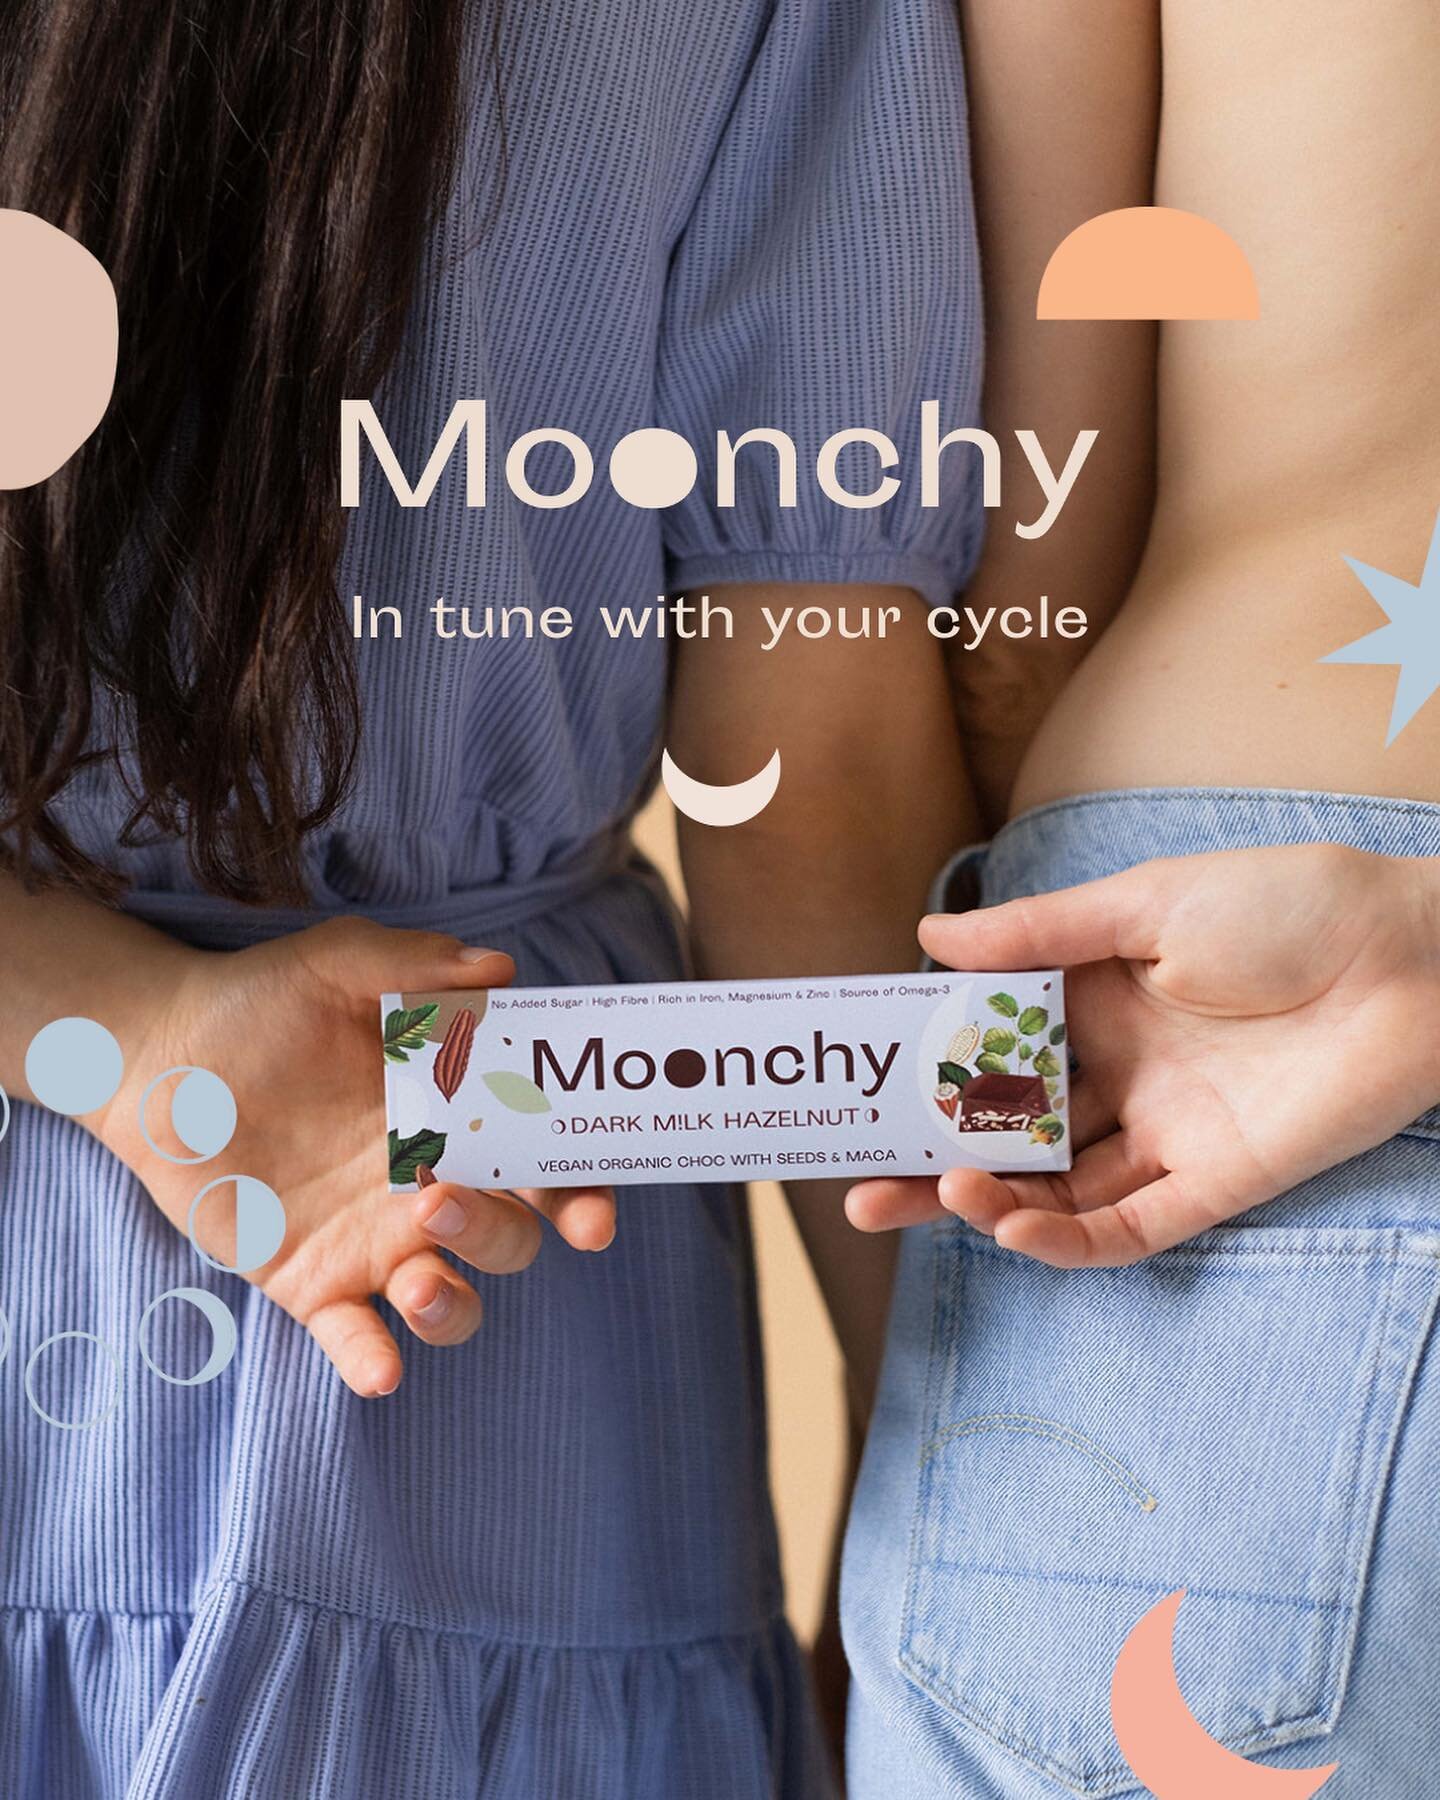 🌙 After enduring the most challenging year of my life, we finally made it. I&rsquo;m happy to announce the relaunch of Moonchy Bars, now better than ever before ✨

🍫 Indulge in your favourite choc bars with seeds &amp; superfoods designed to suppor